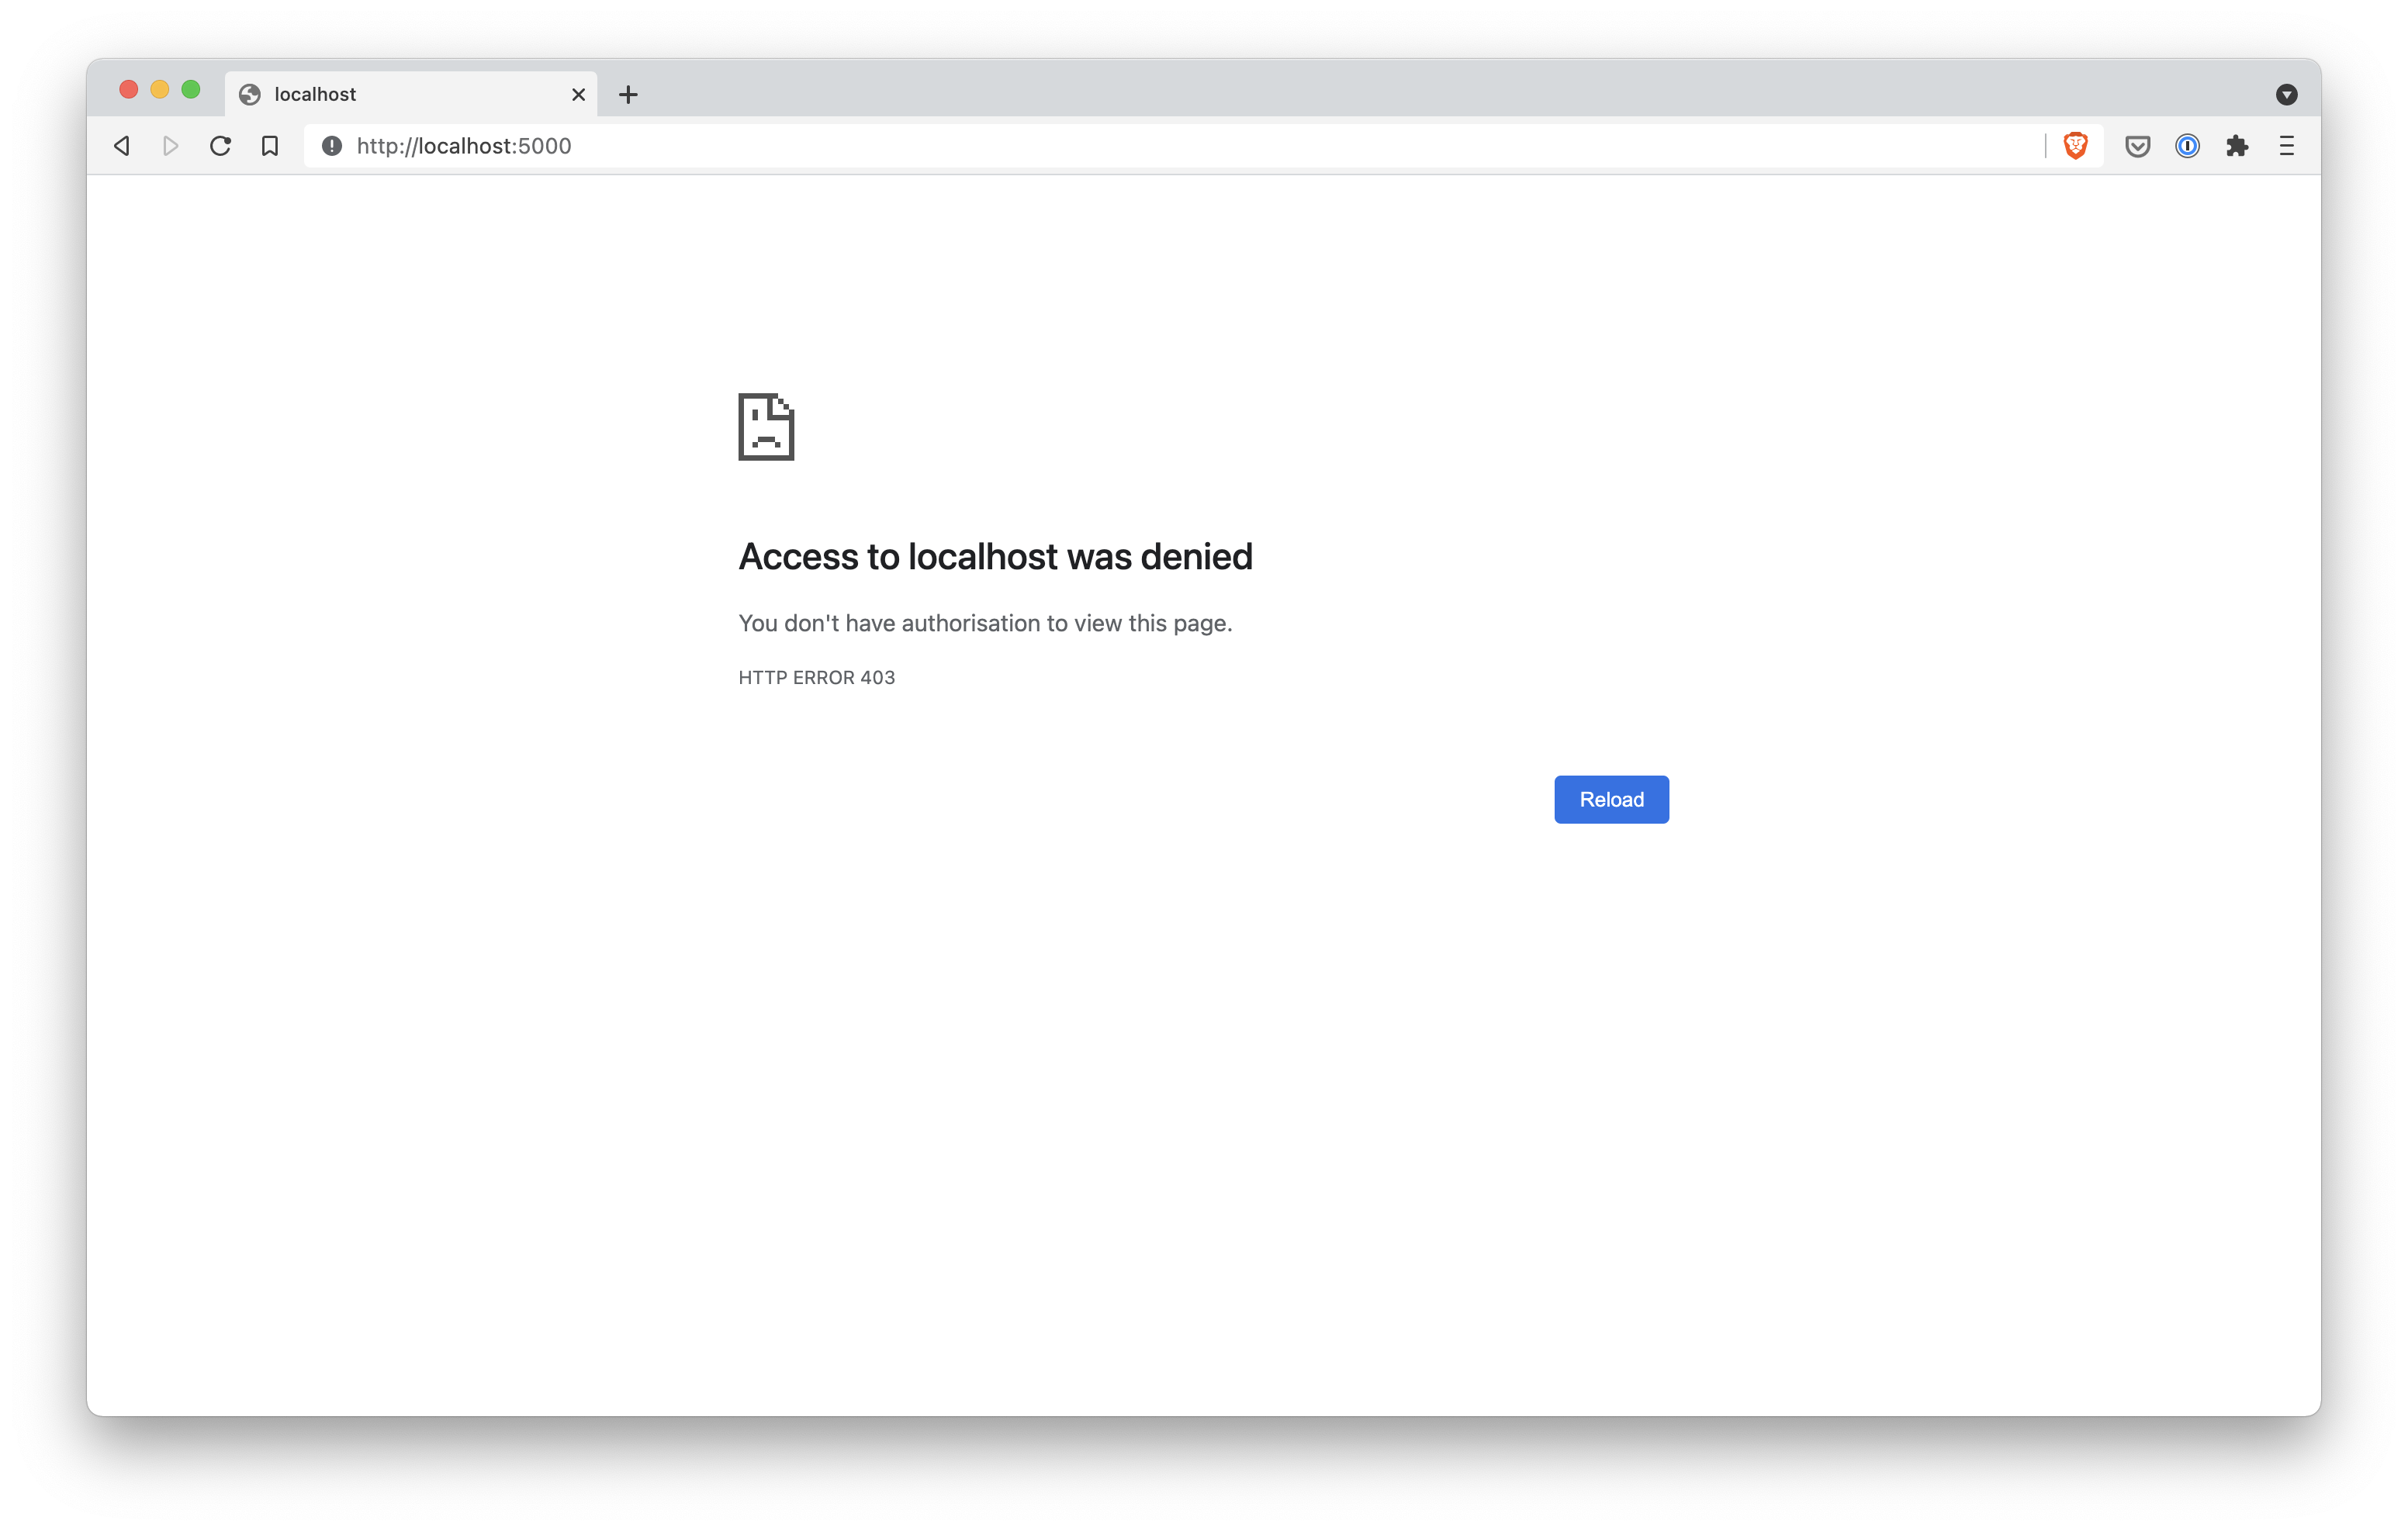 A Brave browser window showing 403 Forbidden when trying to view localhost port 5000